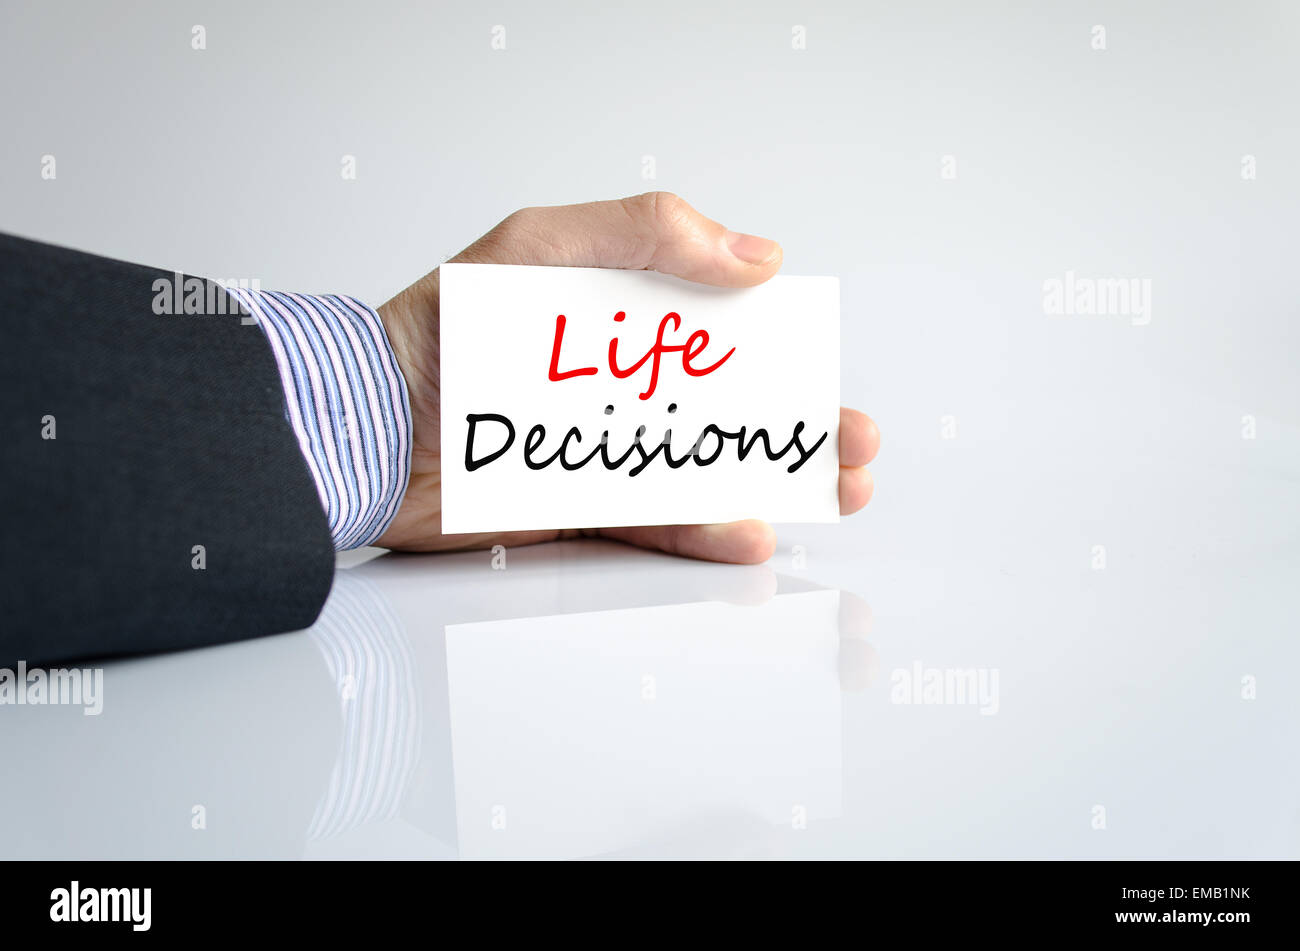 Life Decisions Concept Isolated Over White Background Stock Photo